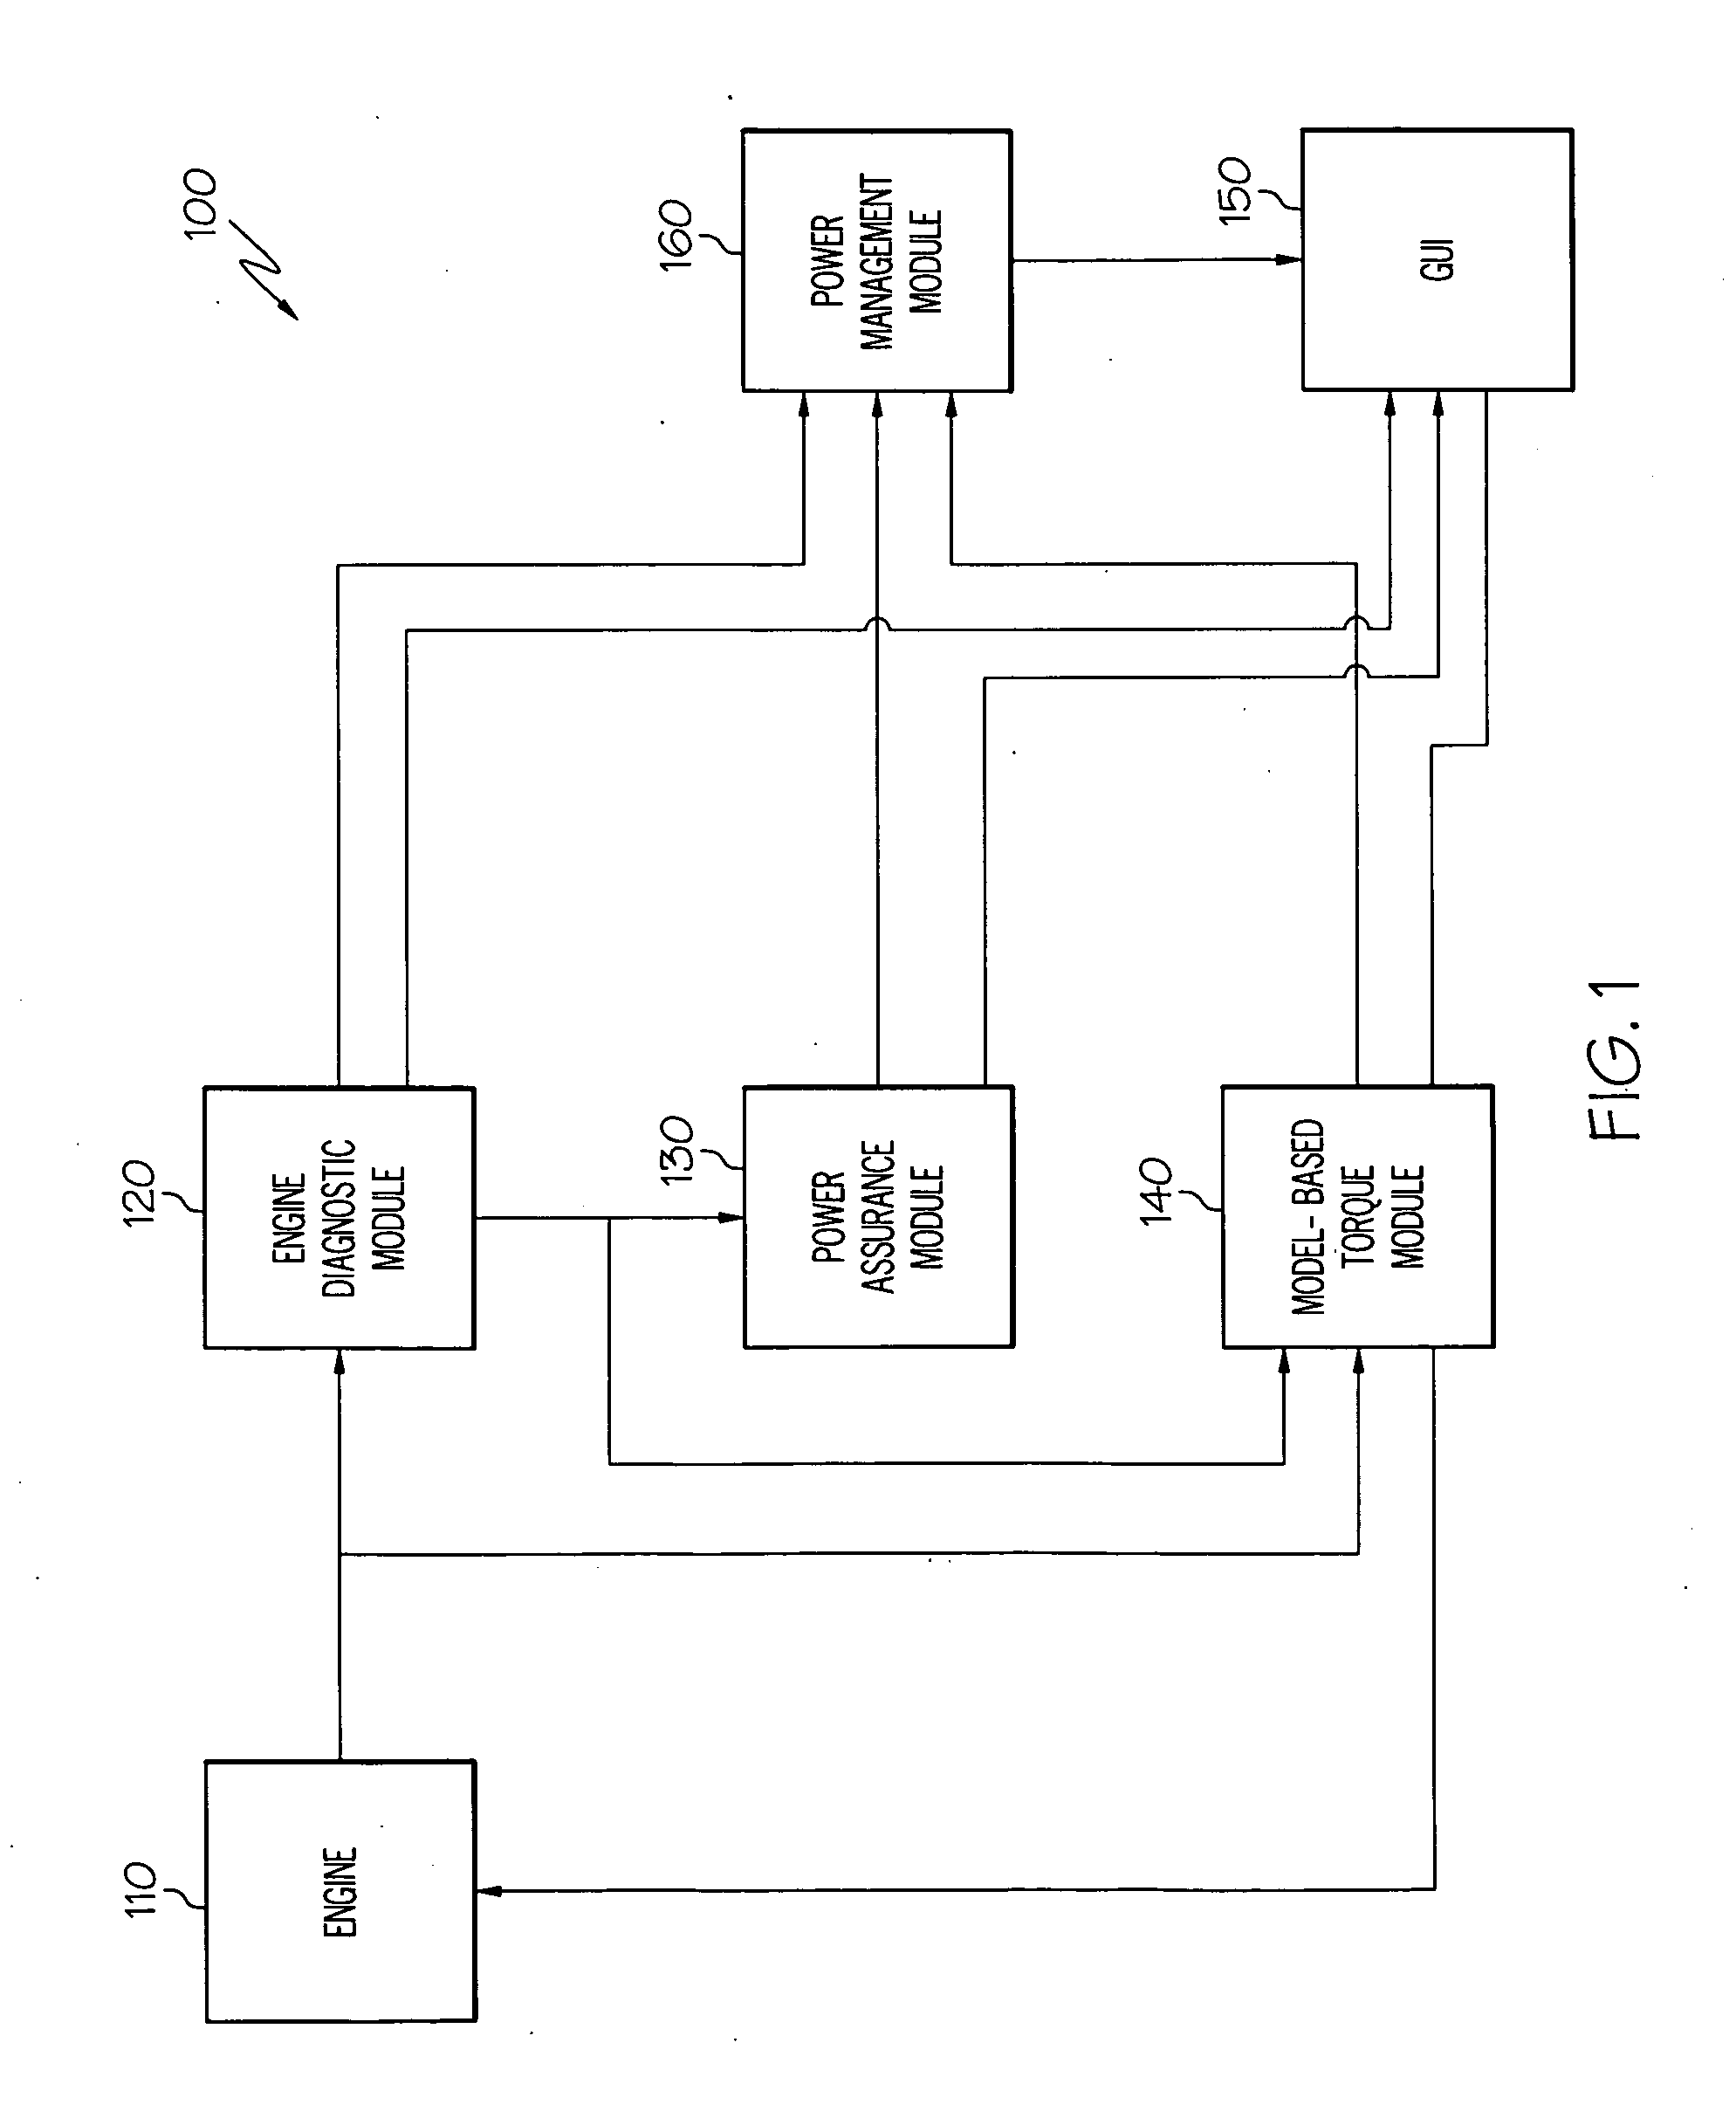 Operations support systems and methods with engine diagnostics